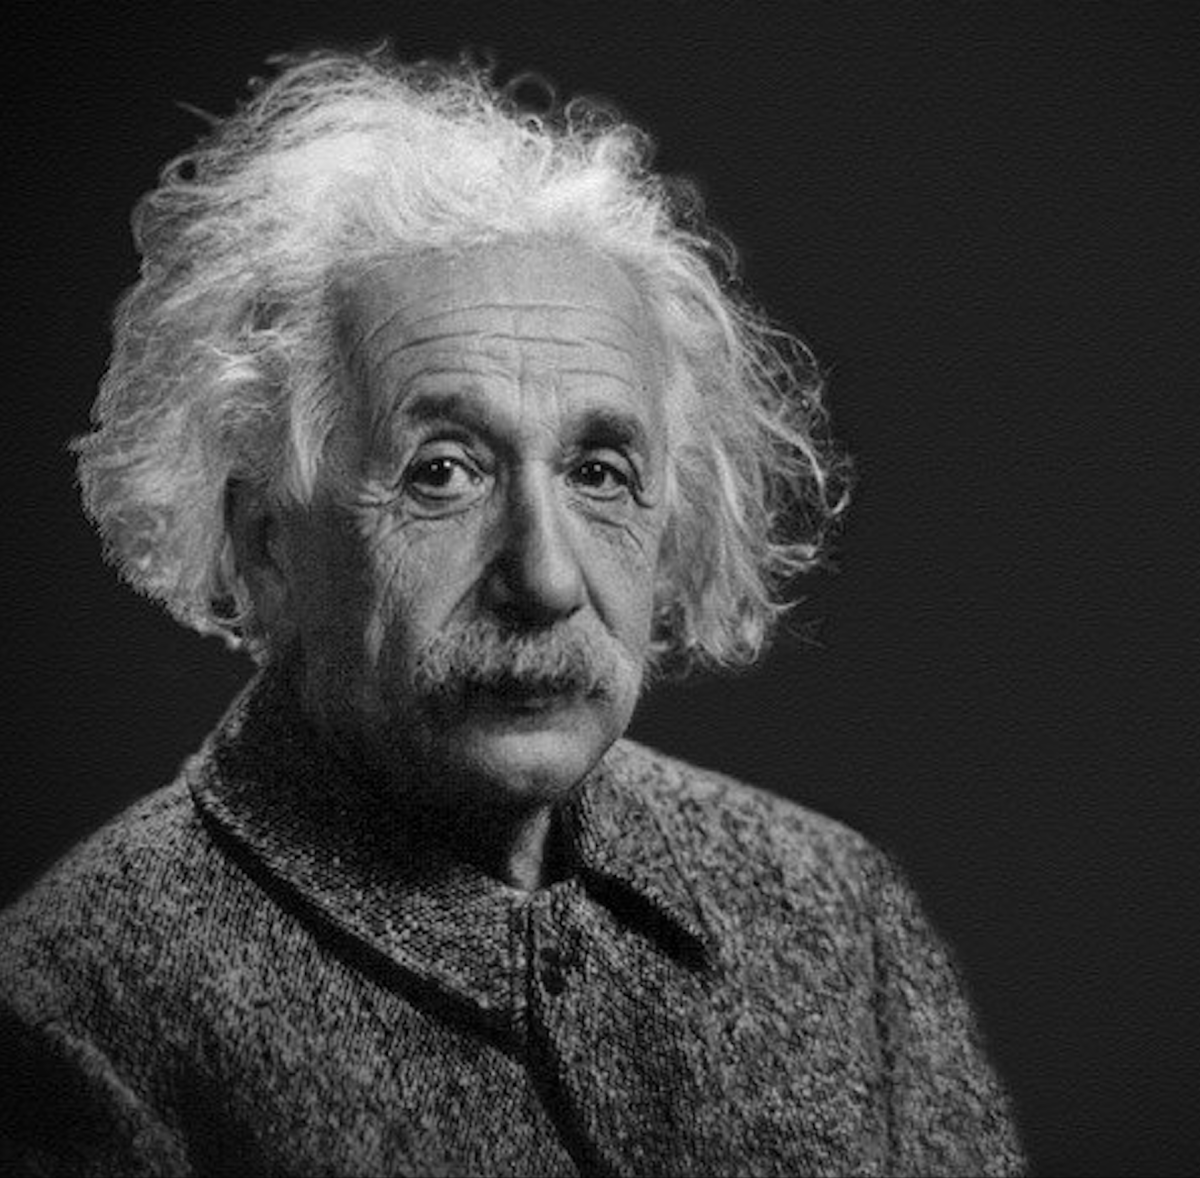 20 Brilliant Quotes From Albert Einstein, the Theoretical Physicist Who Became World Famous